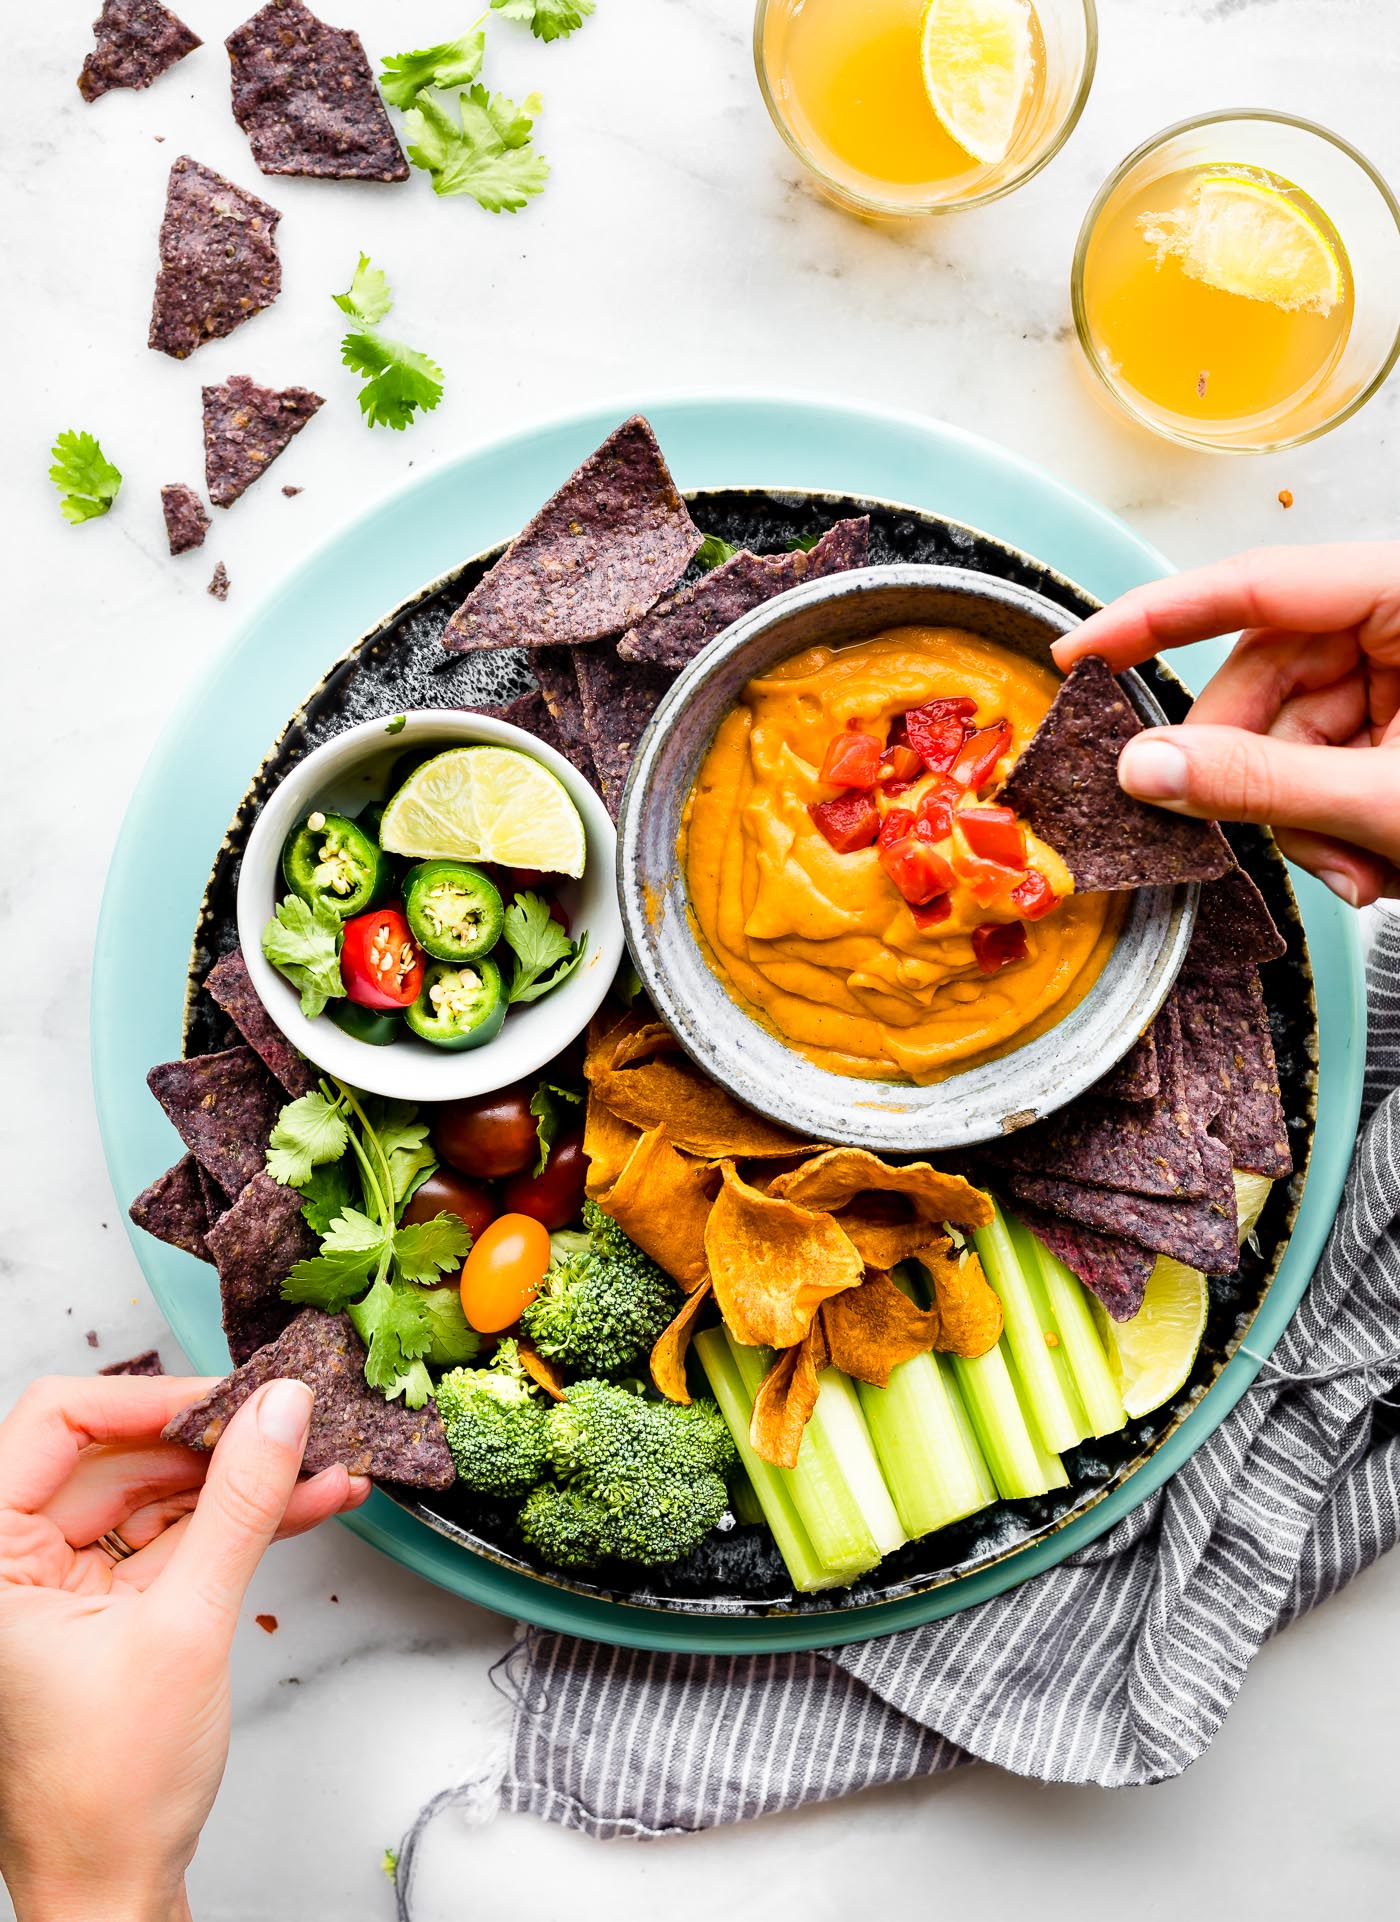 Overhead view round platter with colored tortilla chips and bowl of vegan con queso, a hand dipping a blue chip in queso.